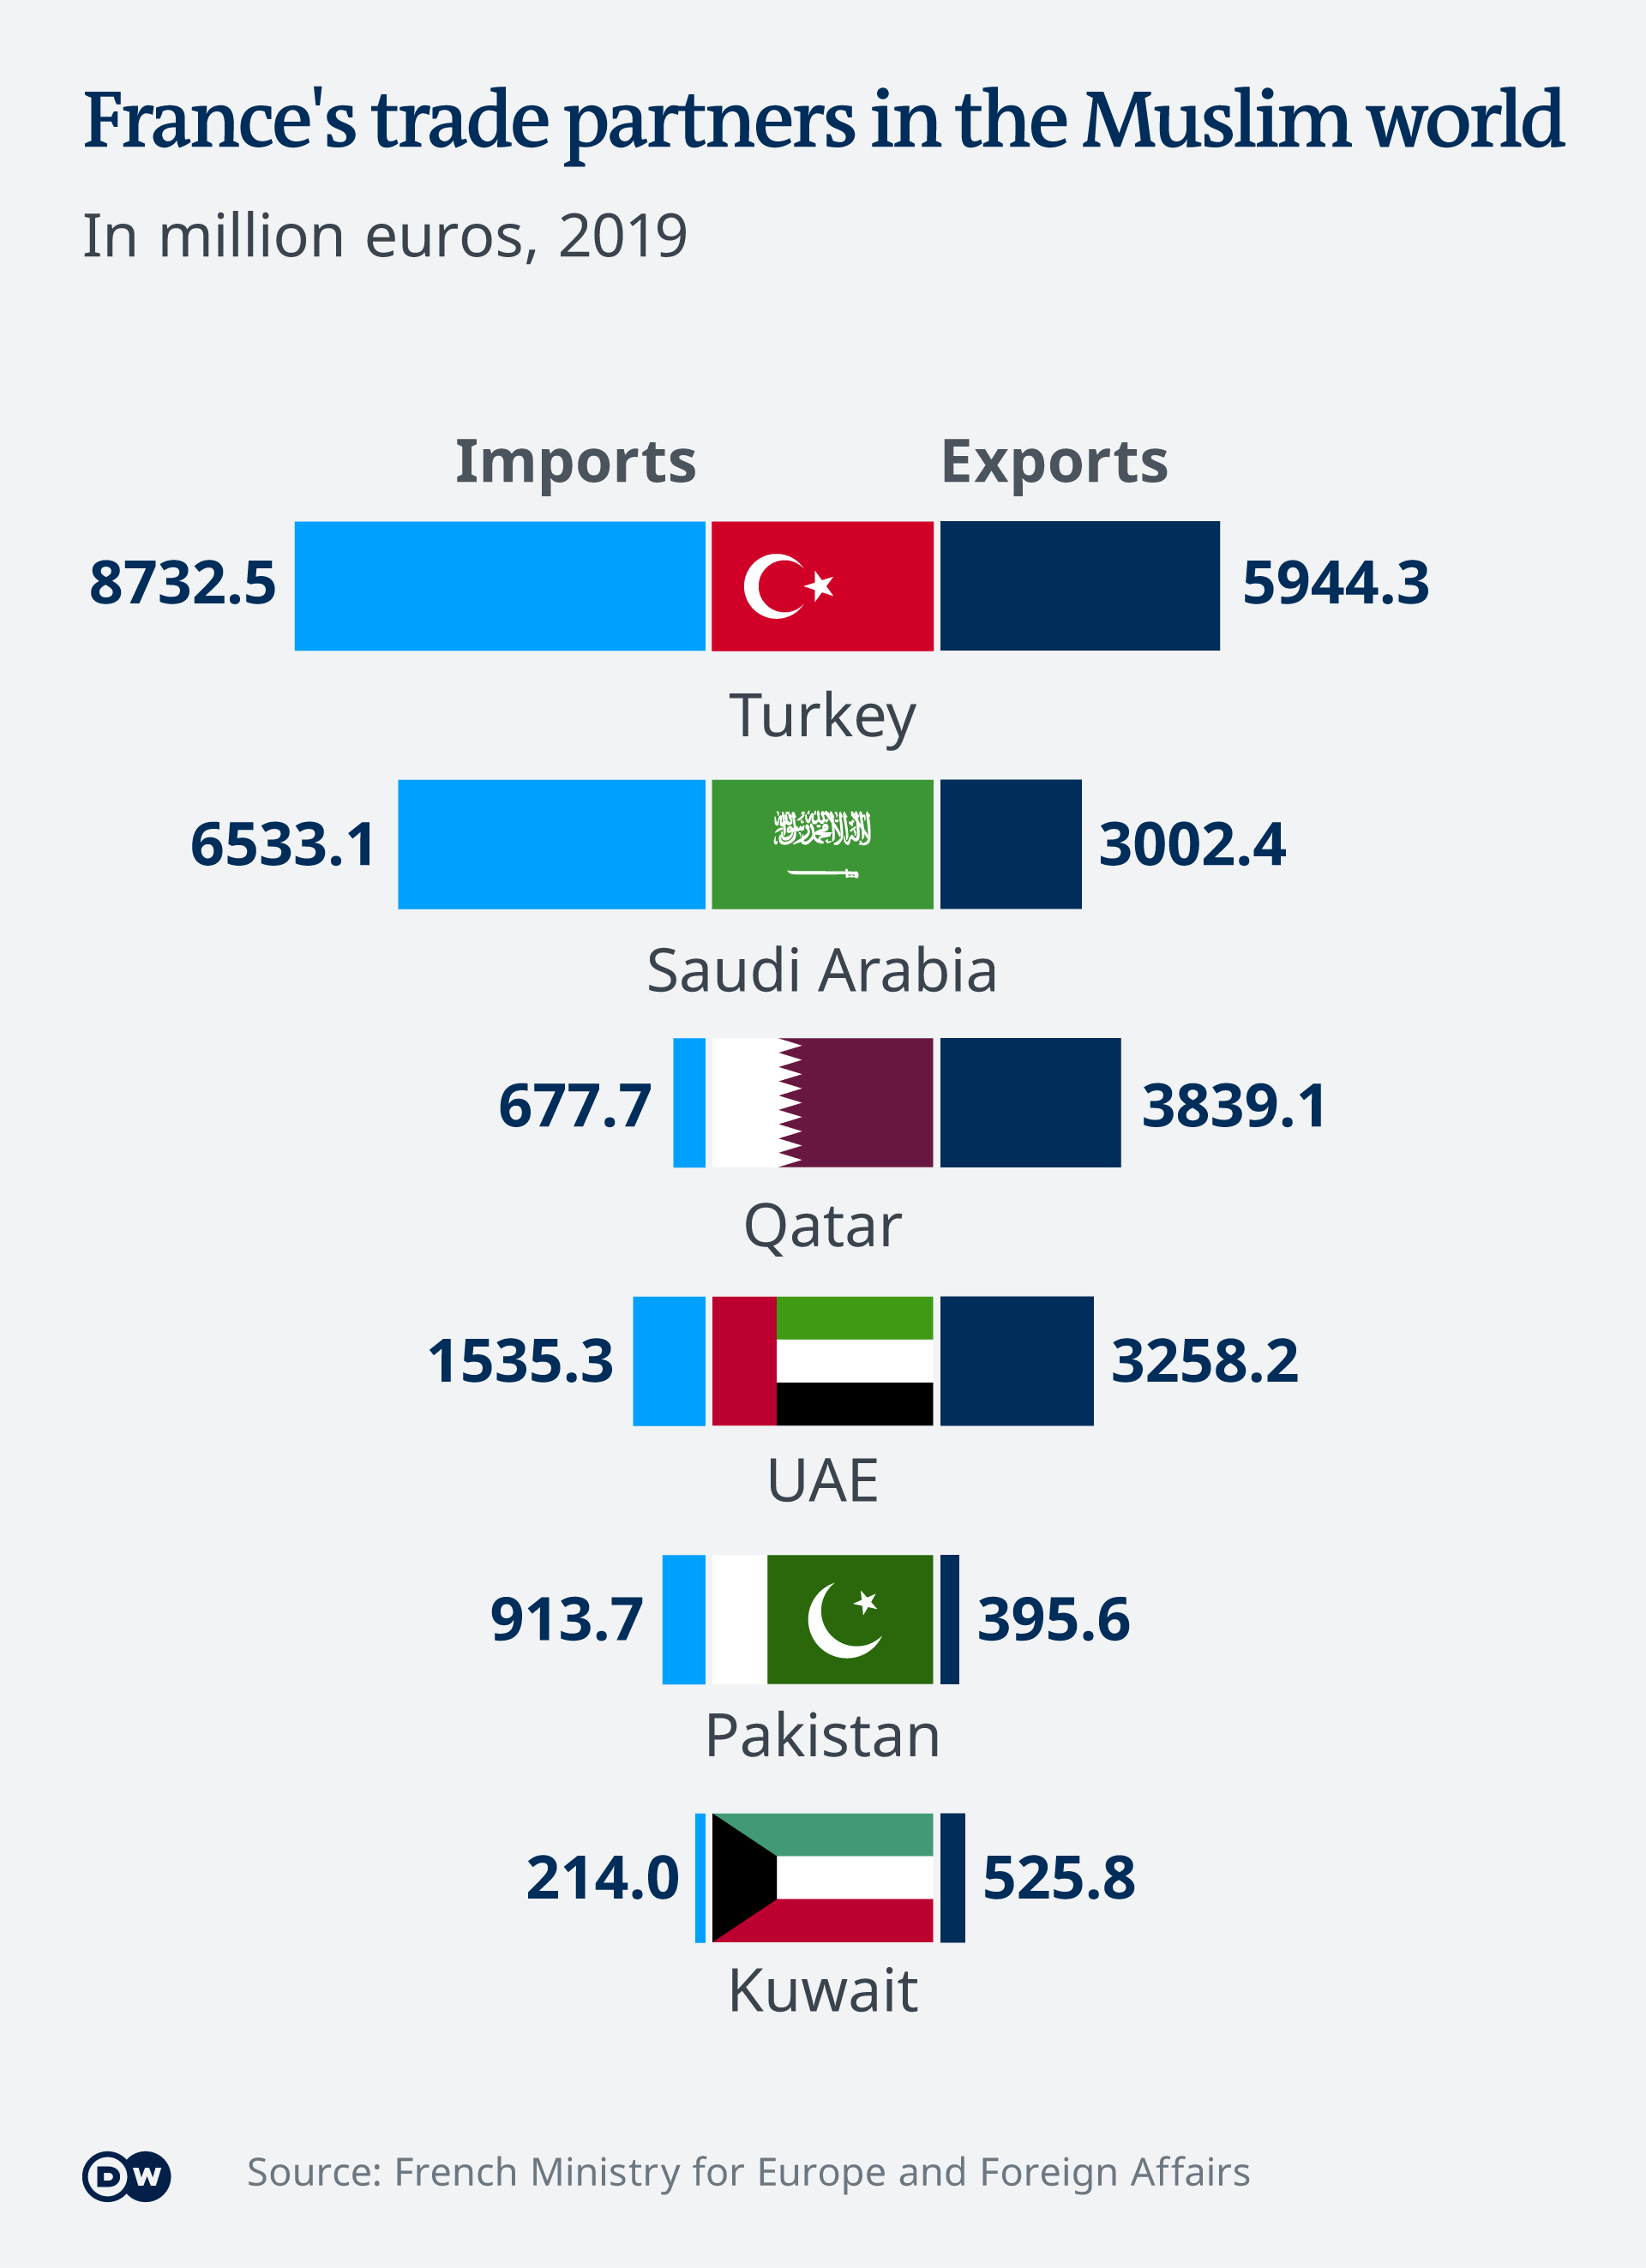 French exports in the Muslim world